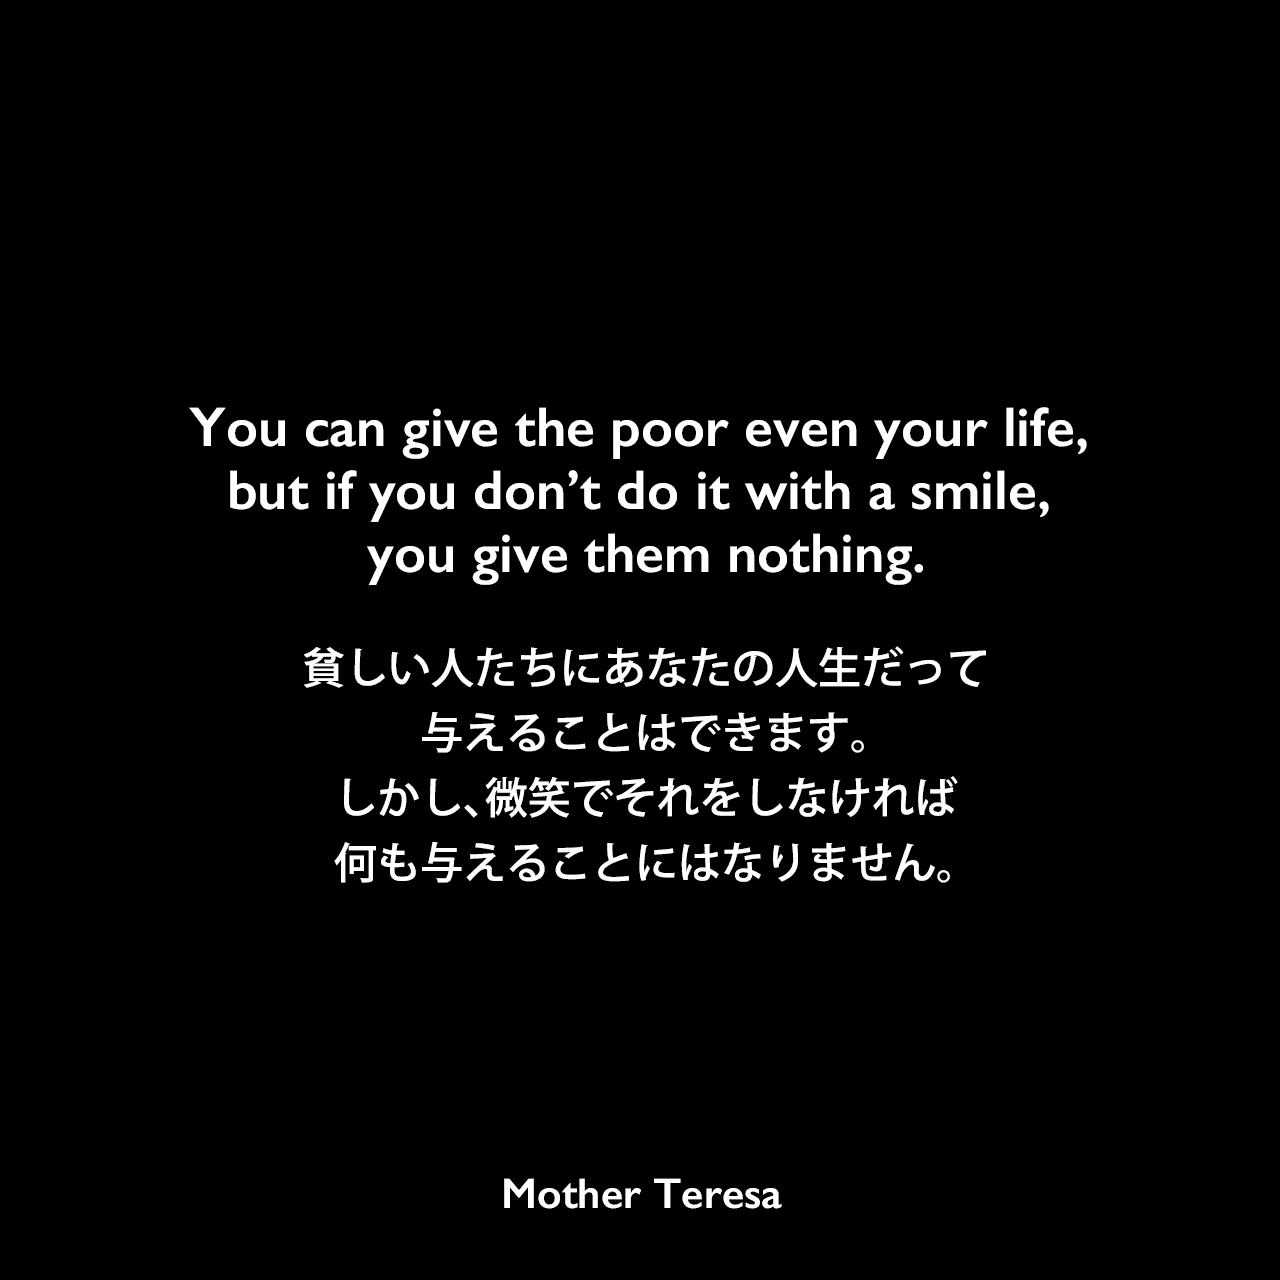 You can give the poor even your life, but if you don’t do it with a smile, you give them nothing.貧しい人たちにあなたの人生だって与えることはできます。しかし、微笑でそれをしなければ、何も与えることにはなりません。Mother Teresa